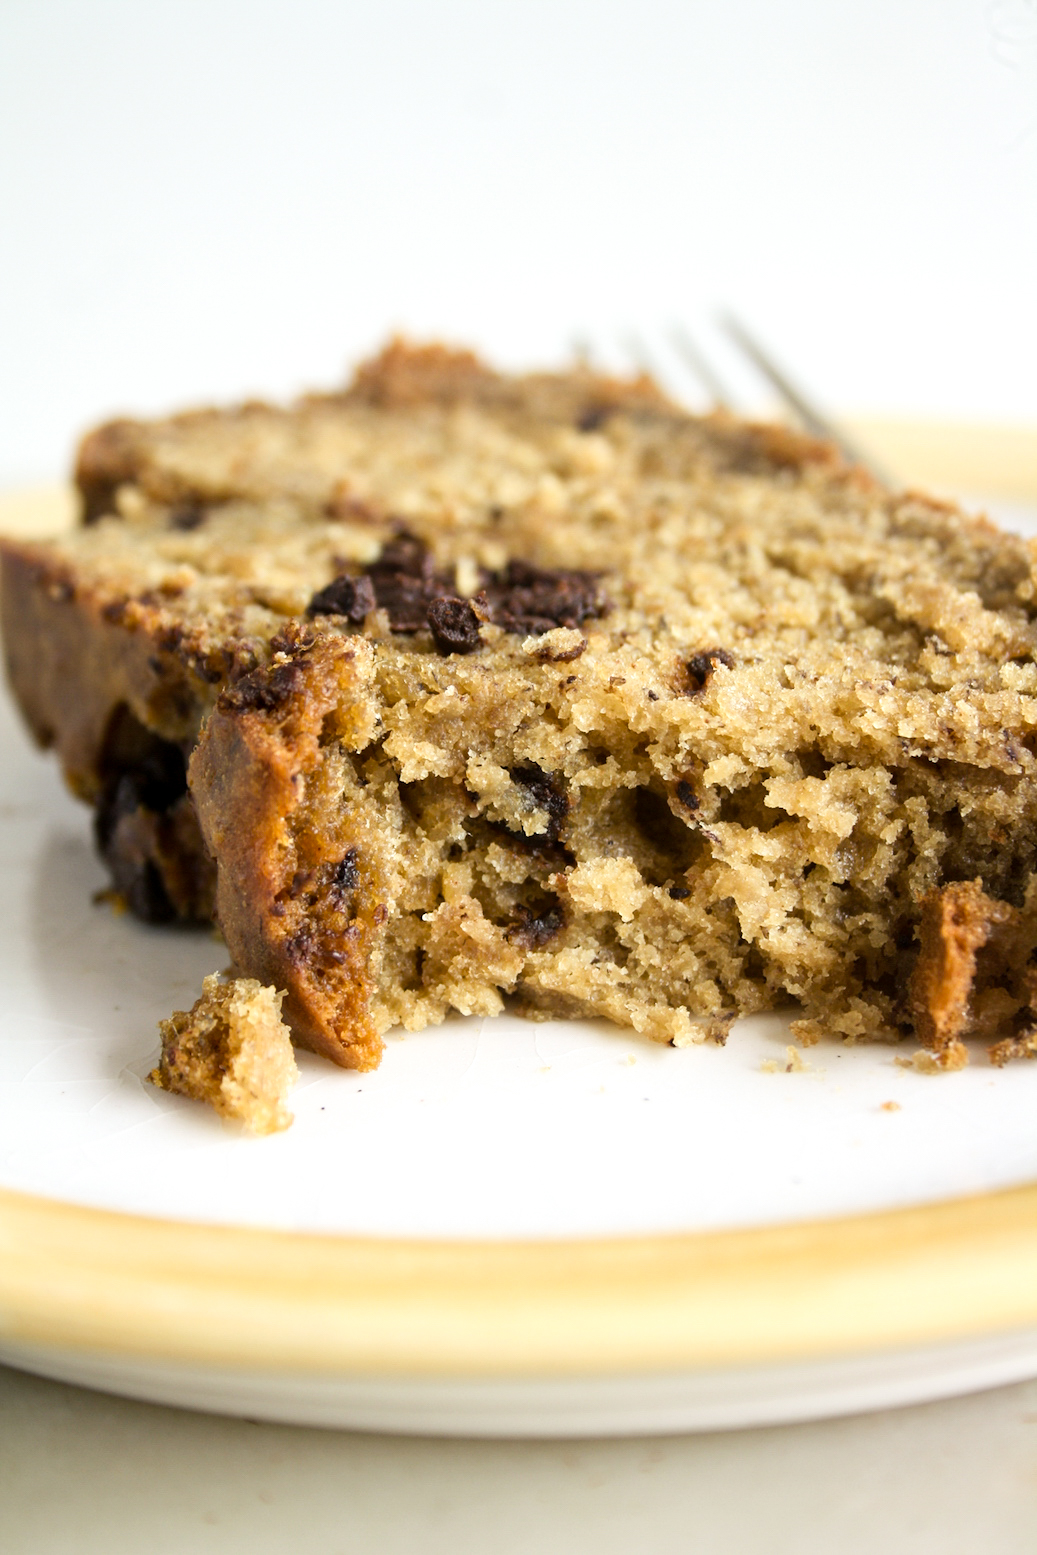 Fluffy and moist wholewheat banana bread, sweetened with honey and packed with chocolate chunks!